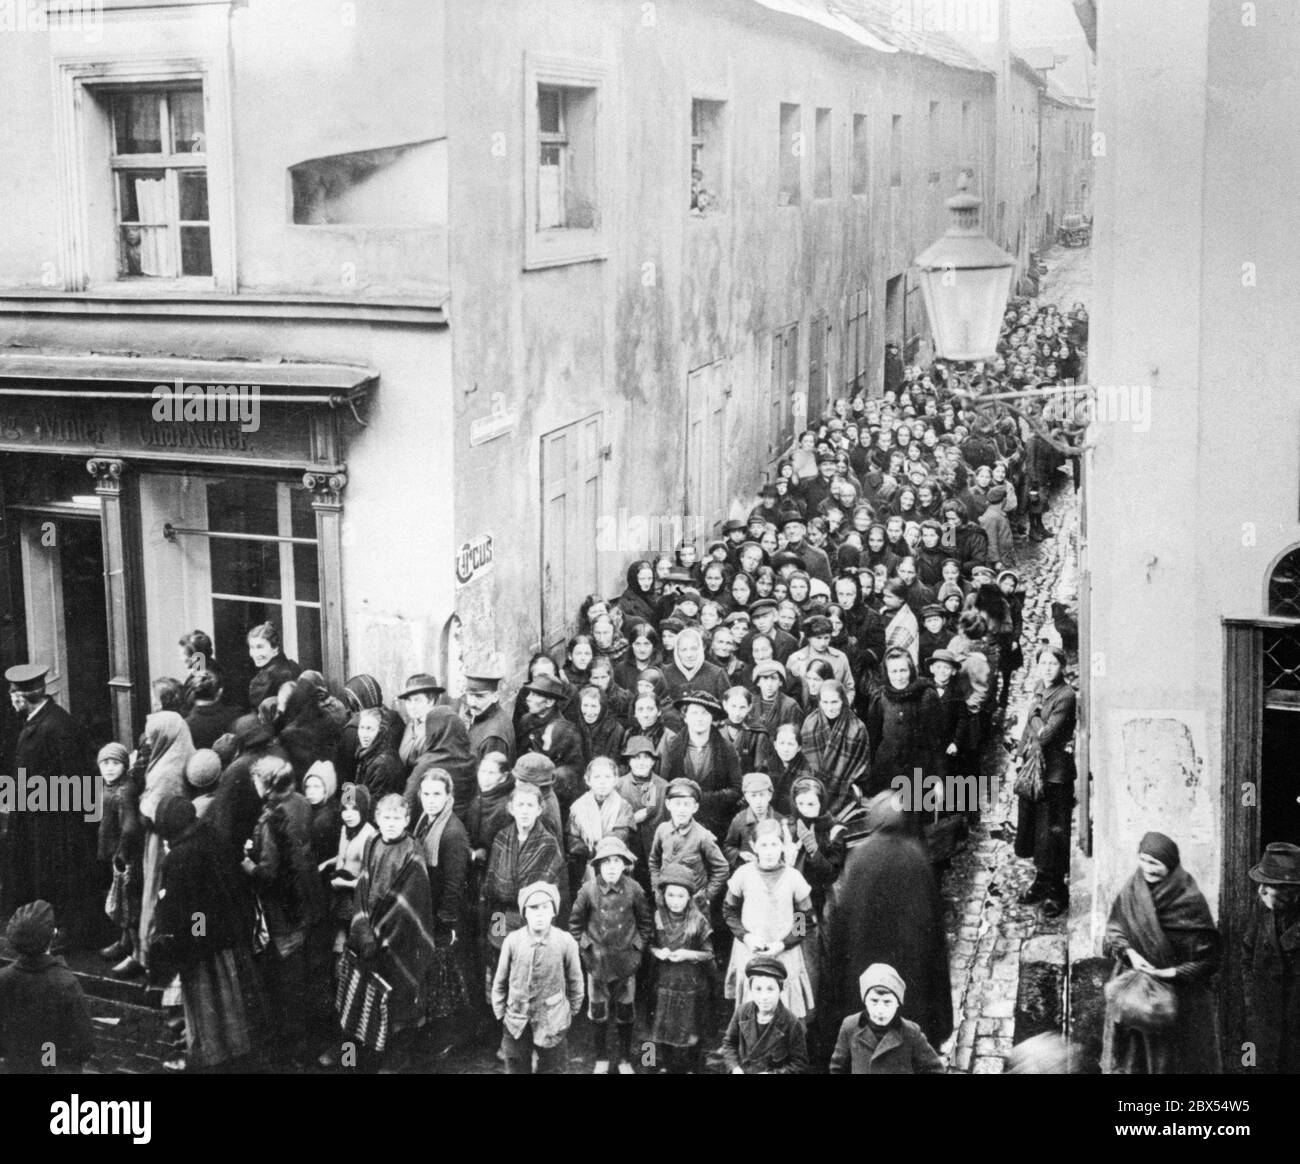 A long queue has formed in front of a bakery in an alley. People are waiting to buy flour. Due to the long war, for which the political and military leadership in Germany did not take precautions, there were supply problems. These culminated in the 'Kohlruebenwinter' ('Turnip Winter') of 1917/1918, in the course of which many old, sick people and children died of exhaustion and malnutrition. Stock Photo